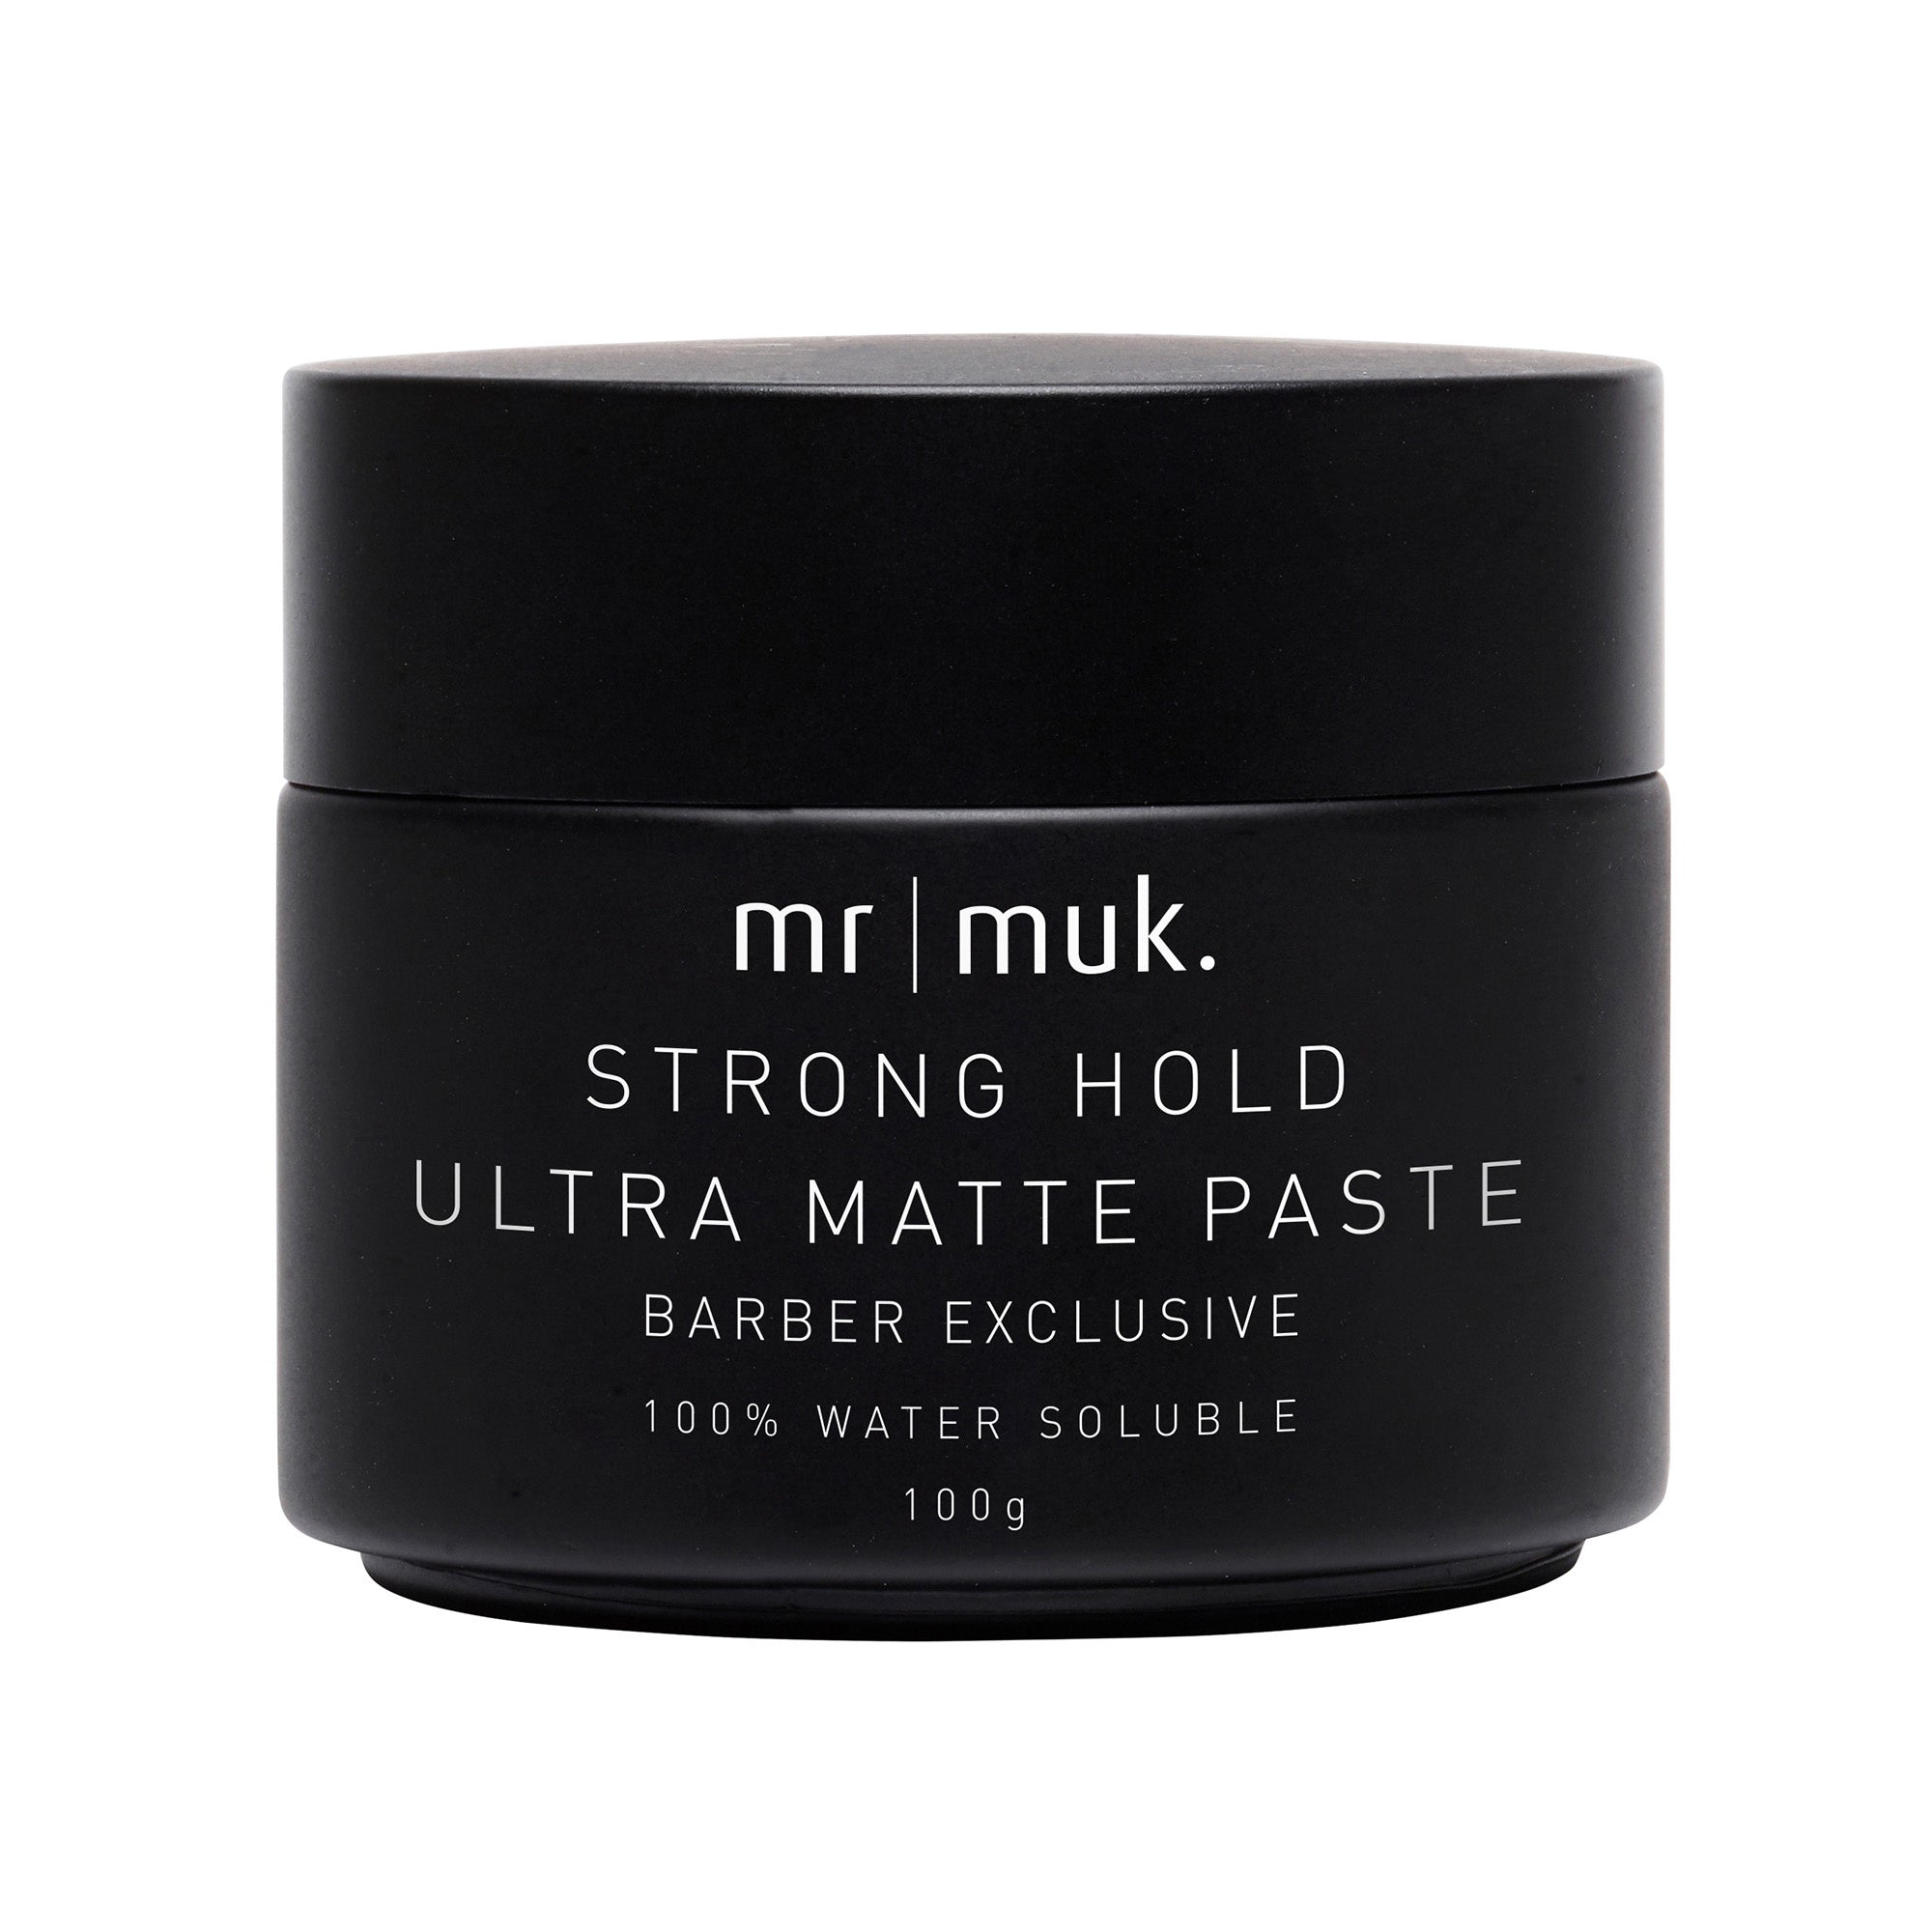 Mr Muk Strong Hold Ultra Matte Paste deadlocks styles into place without an ounce of shine factor.